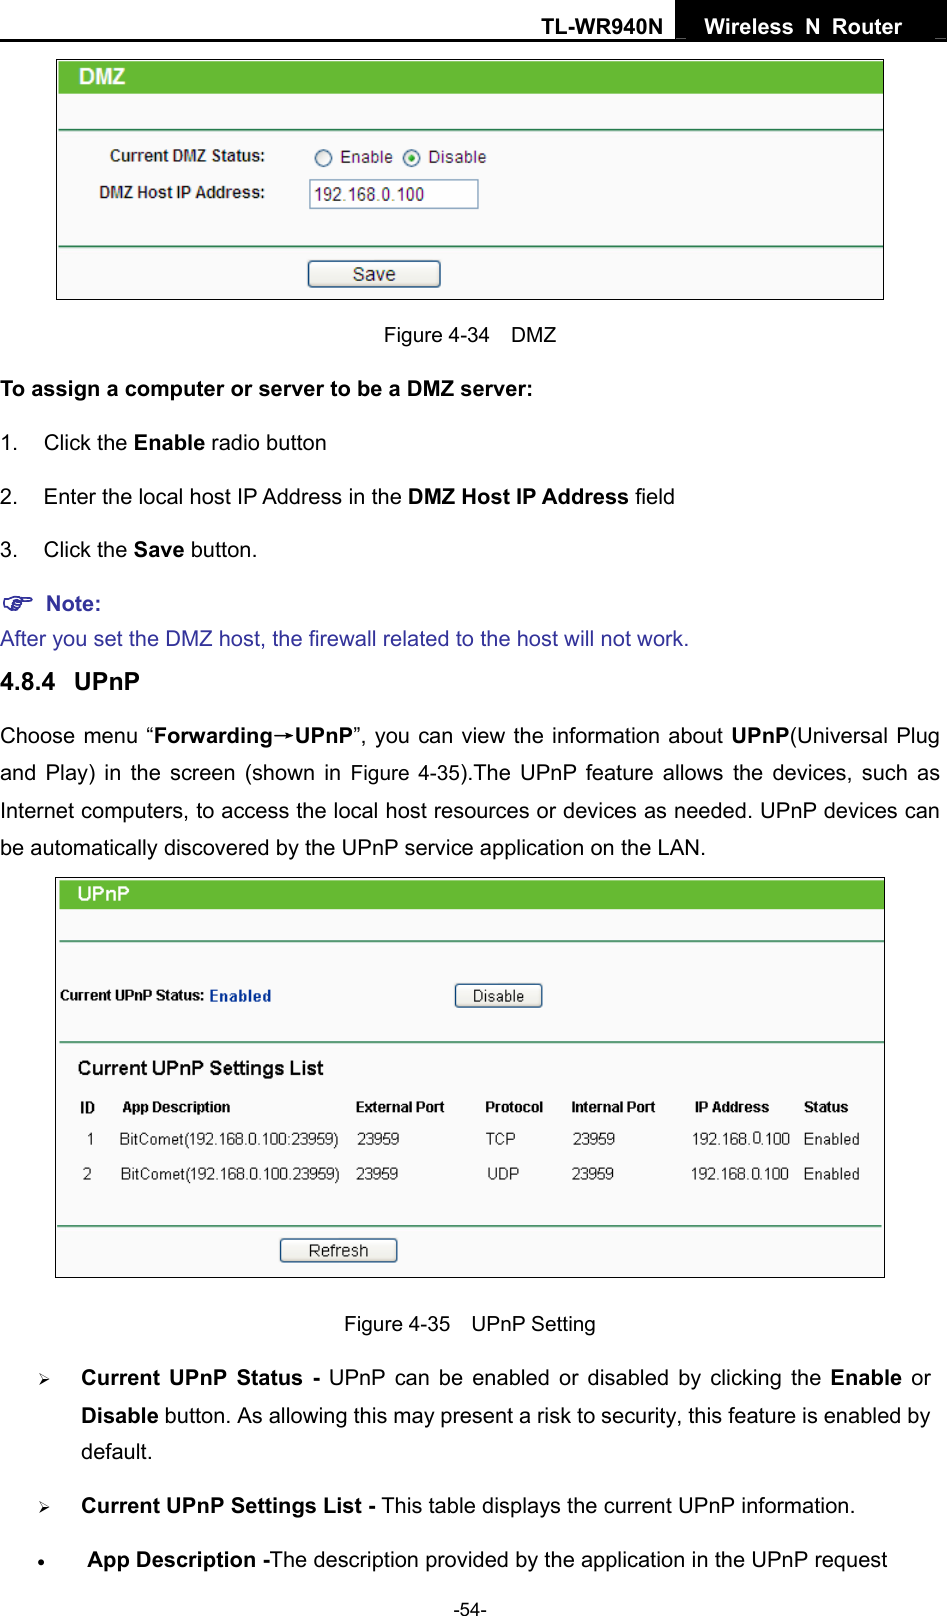 TL-WR940N  Wireless N Router    Figure 4-34  DMZ To assign a computer or server to be a DMZ server:   1. Click the Enable radio button 2.  Enter the local host IP Address in the DMZ Host IP Address field 3. Click the Save button. ) Note:  After you set the DMZ host, the firewall related to the host will not work. 4.8.4  UPnP Choose menu “Forwarding→UPnP”, you can view the information about UPnP(Universal Plug and Play) in the screen (shown in Figure 4-35).The UPnP feature allows the devices, such as Internet computers, to access the local host resources or devices as needed. UPnP devices can be automatically discovered by the UPnP service application on the LAN.    Figure 4-35  UPnP Setting ¾ Current UPnP Status - UPnP can be enabled or disabled by clicking the Enable or Disable button. As allowing this may present a risk to security, this feature is enabled by default.  ¾ Current UPnP Settings List - This table displays the current UPnP information. • App Description -The description provided by the application in the UPnP request -54- 